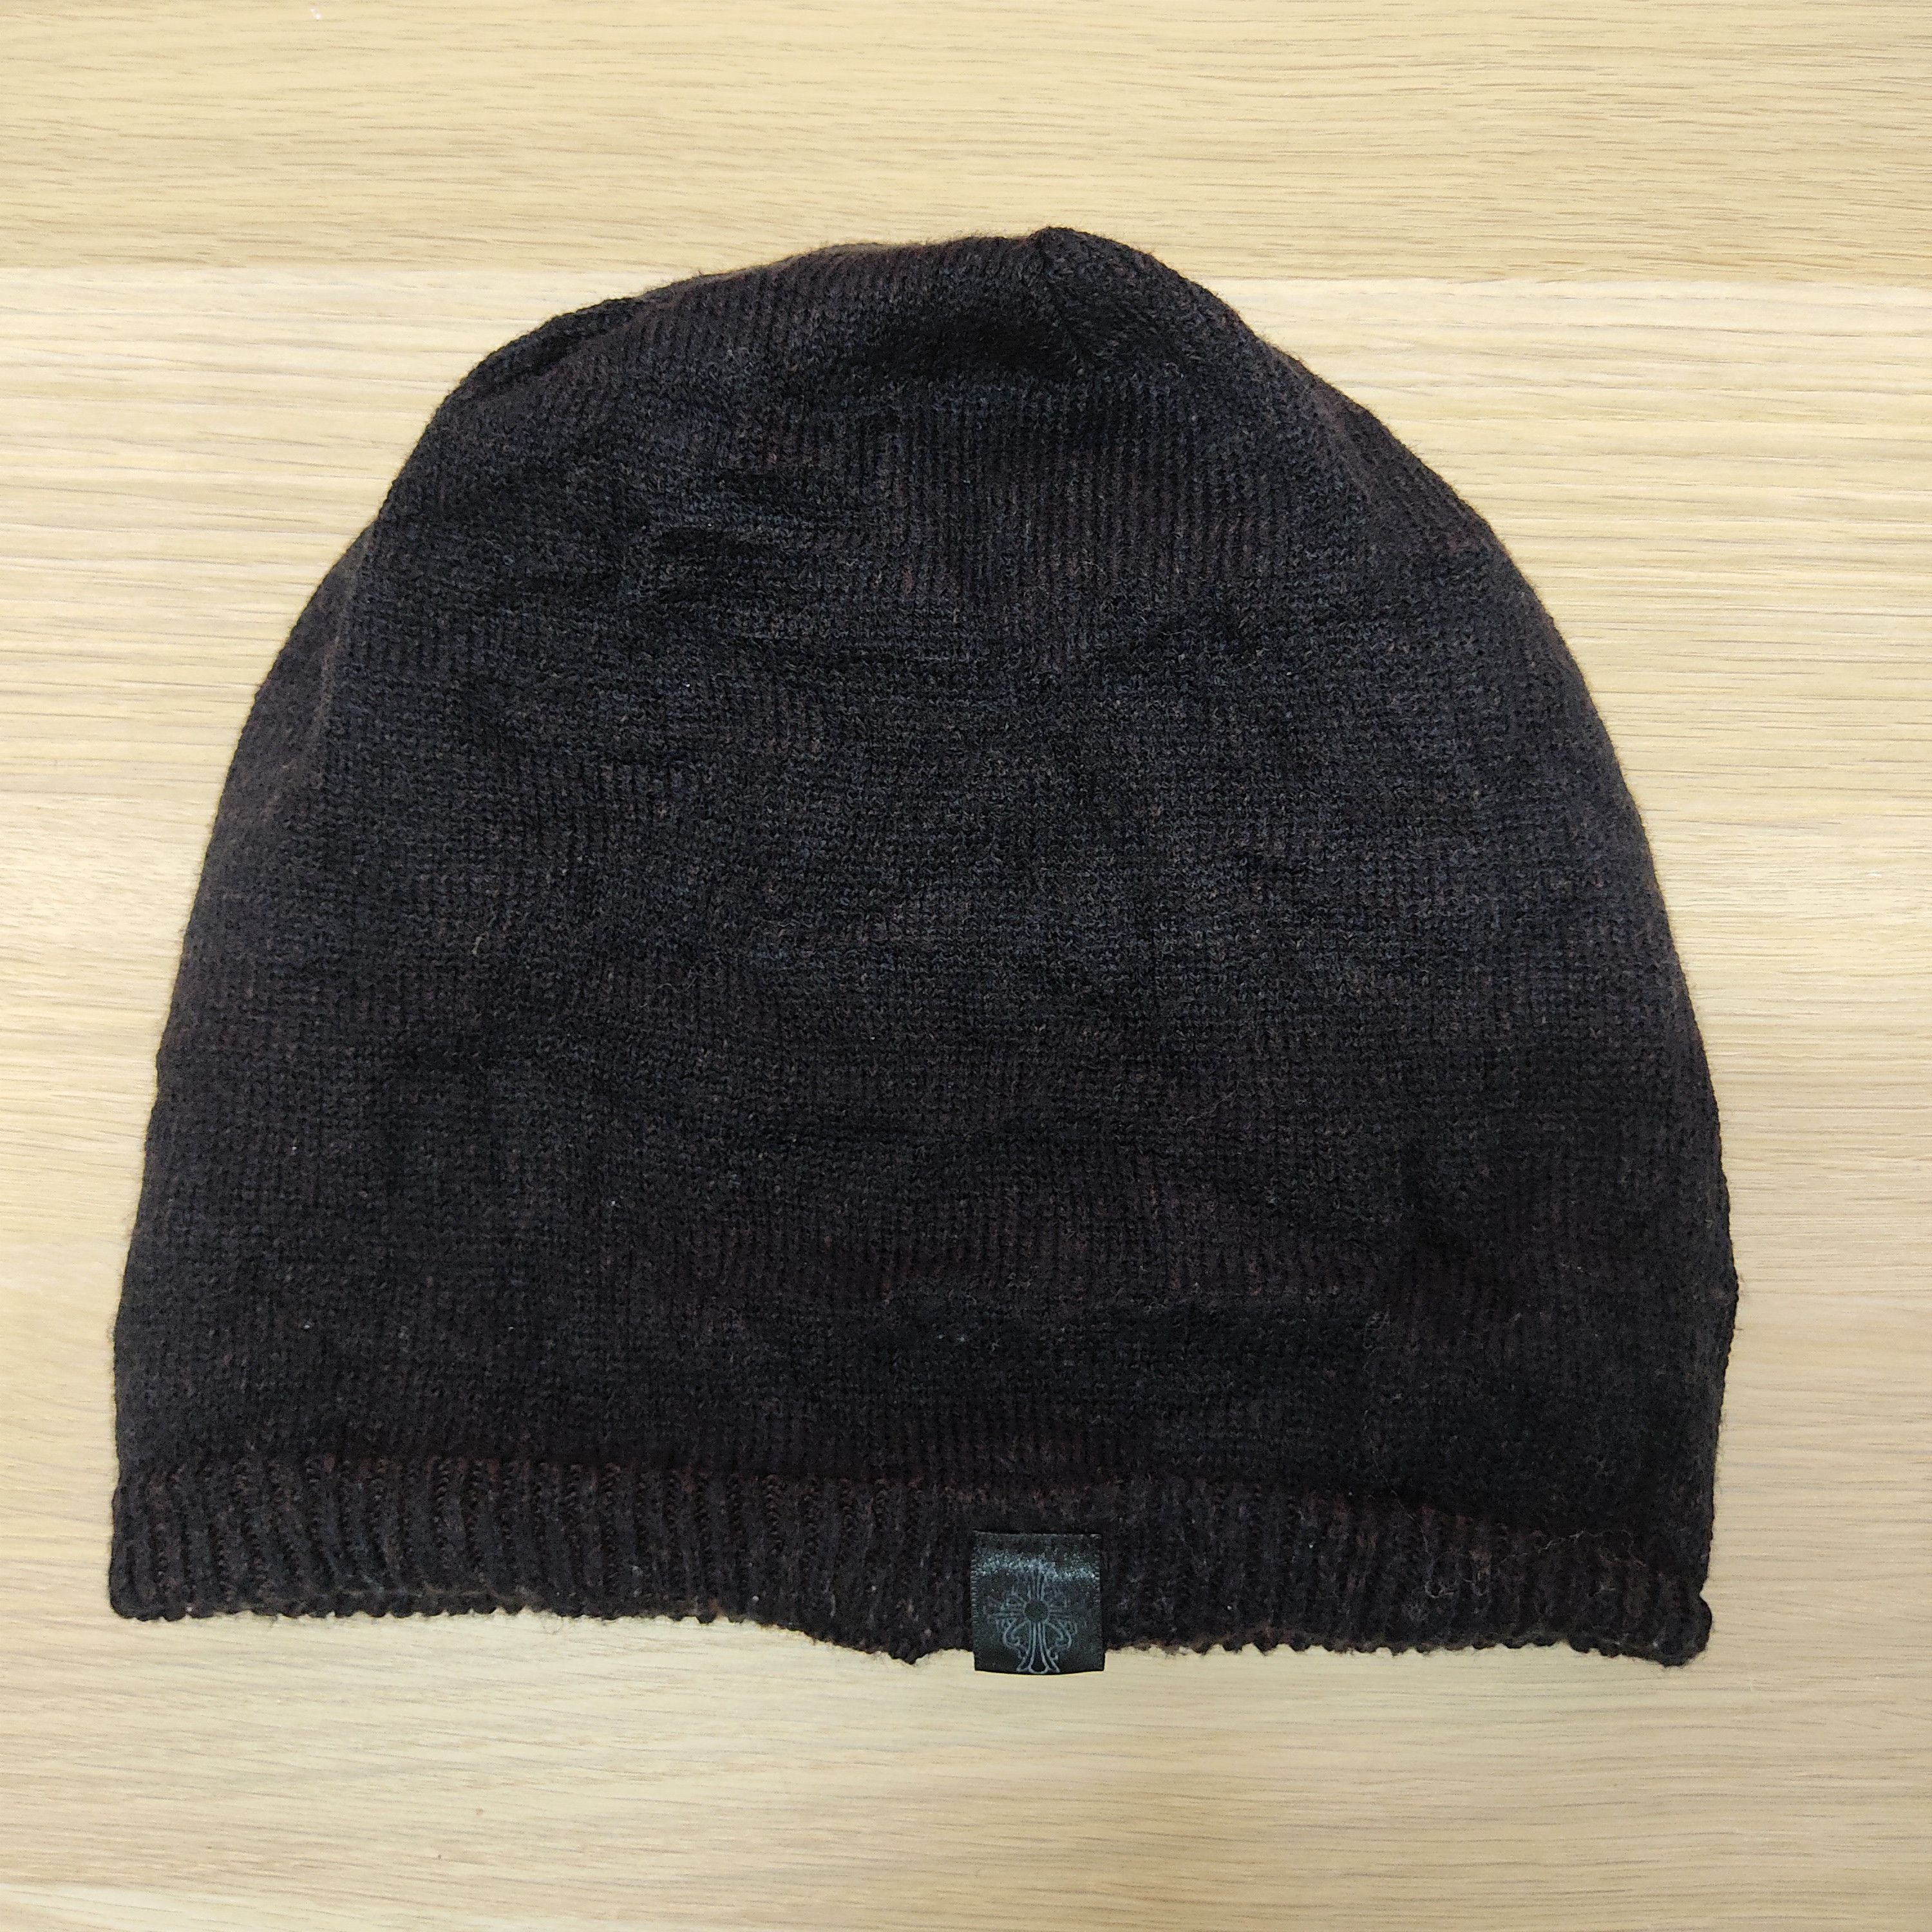 Rare - Reversible Knitted Chrome Hearts Inspired Pattern Beanie - 4